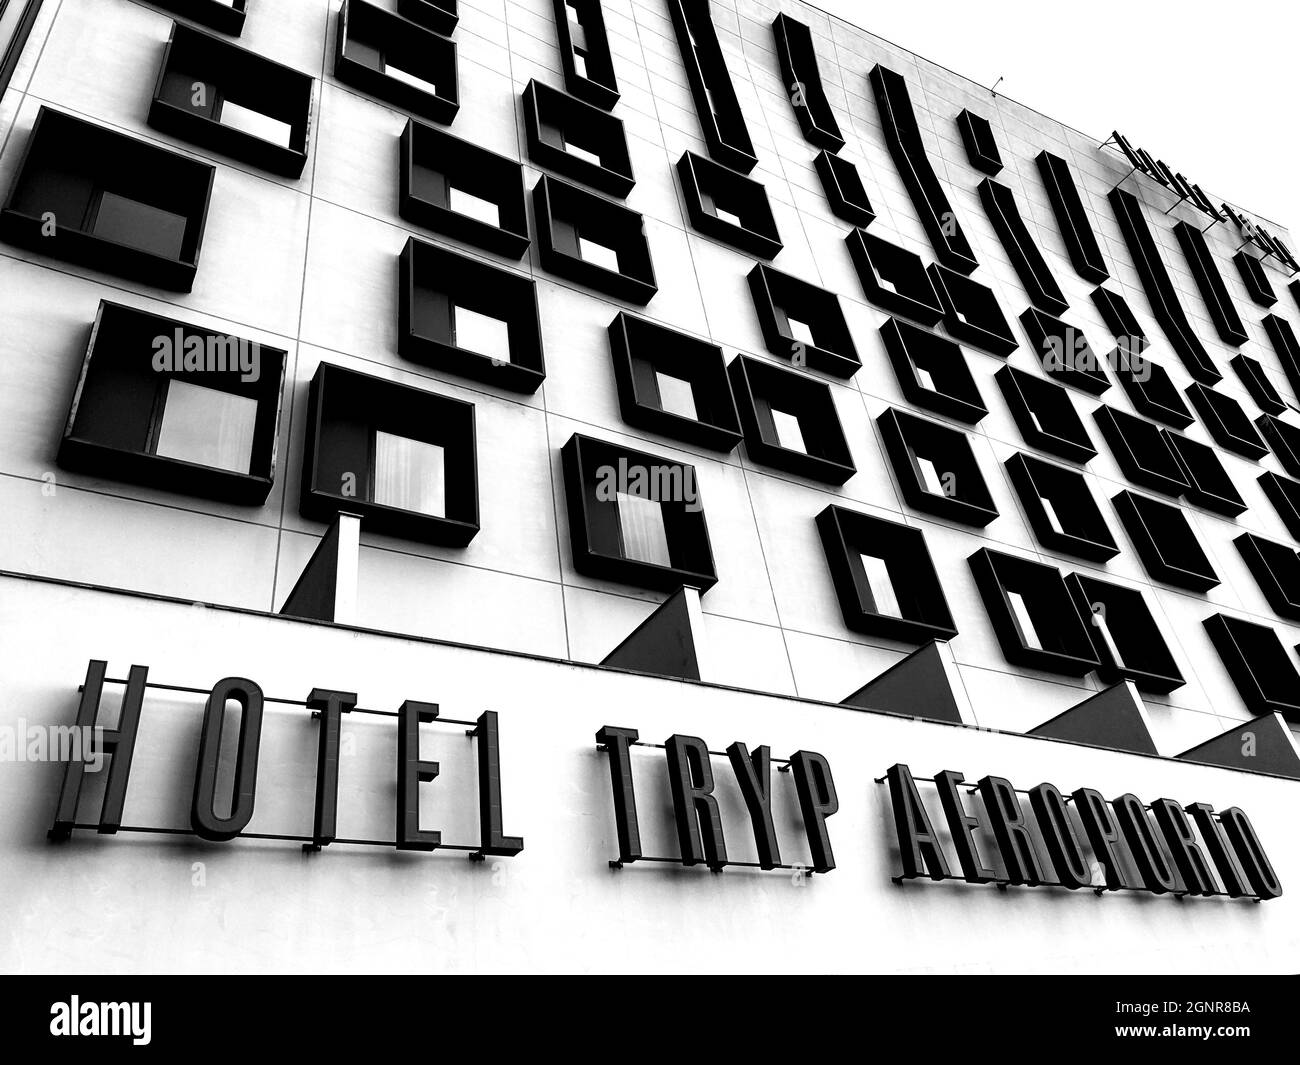 Airport Hotel Tryp, Lissabon, Portugal Stock Photo